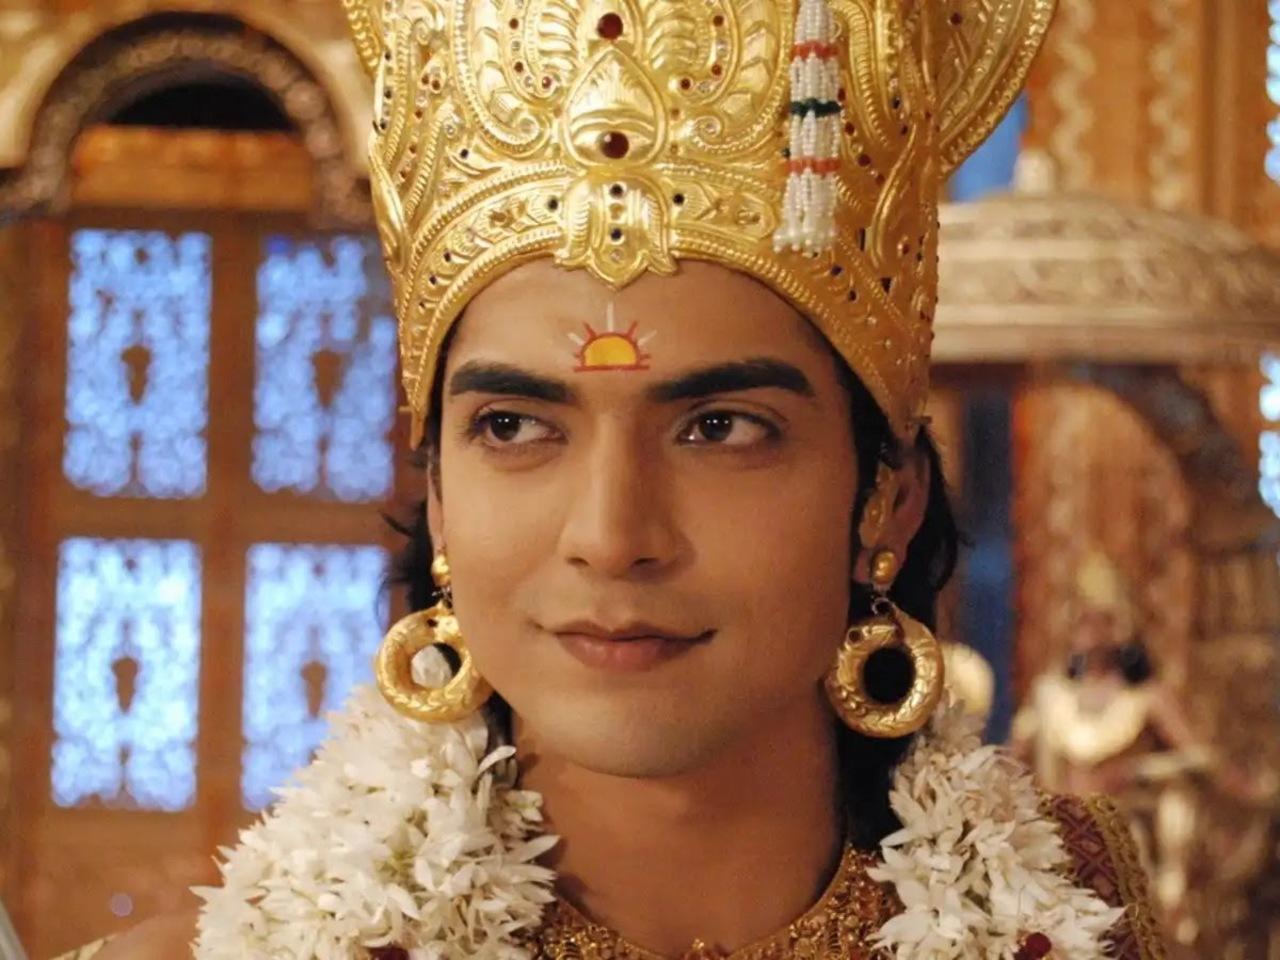 Gurmeet Choudhary rose to fame as Lord Ram in Ramayan, a television show that came out in the year 2008. 